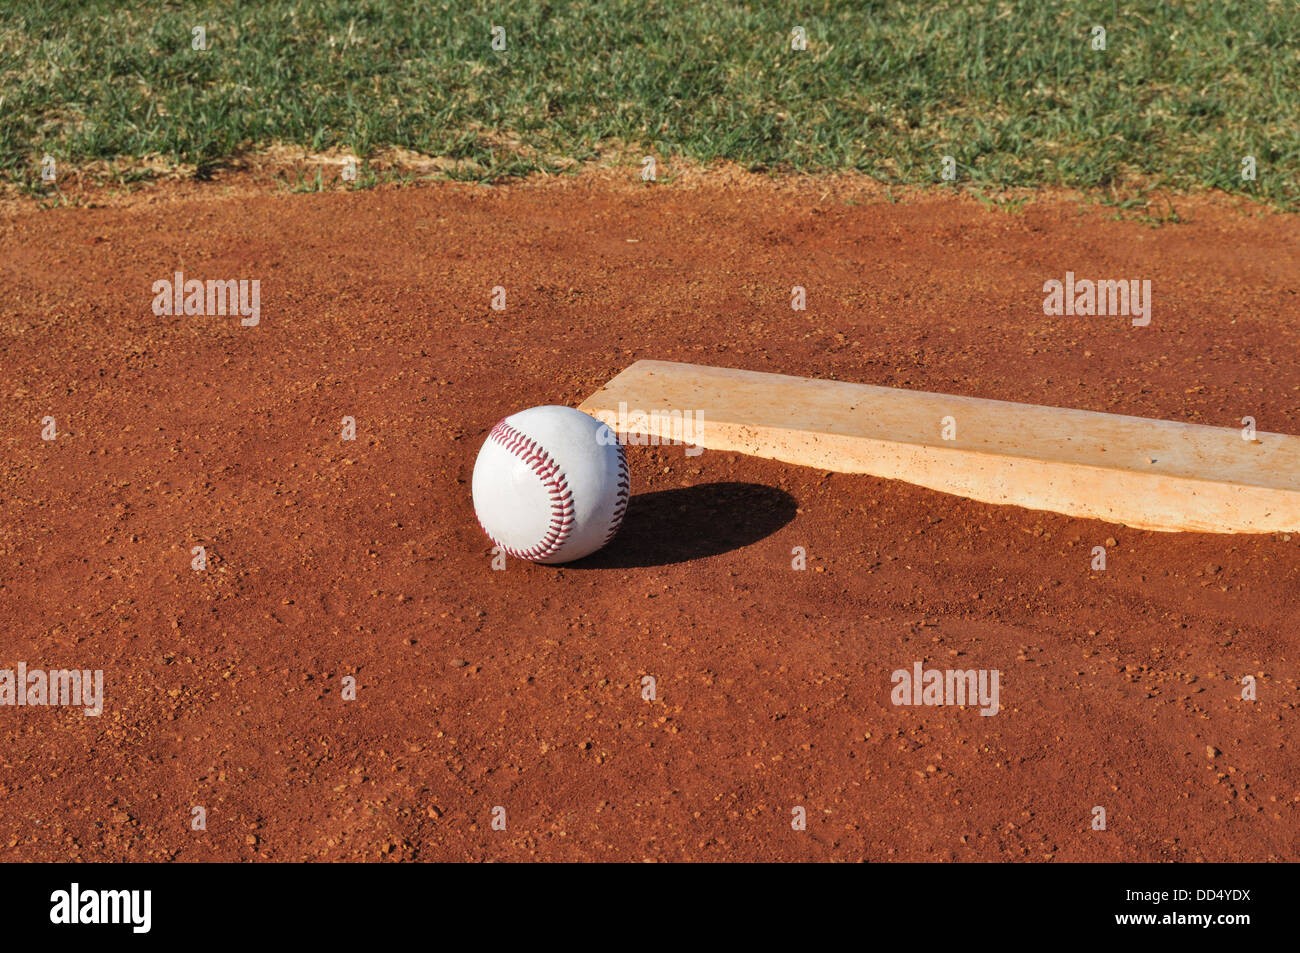 Baseball on the Pitcher's Mound Near the Pitching Rubber Stock Photo